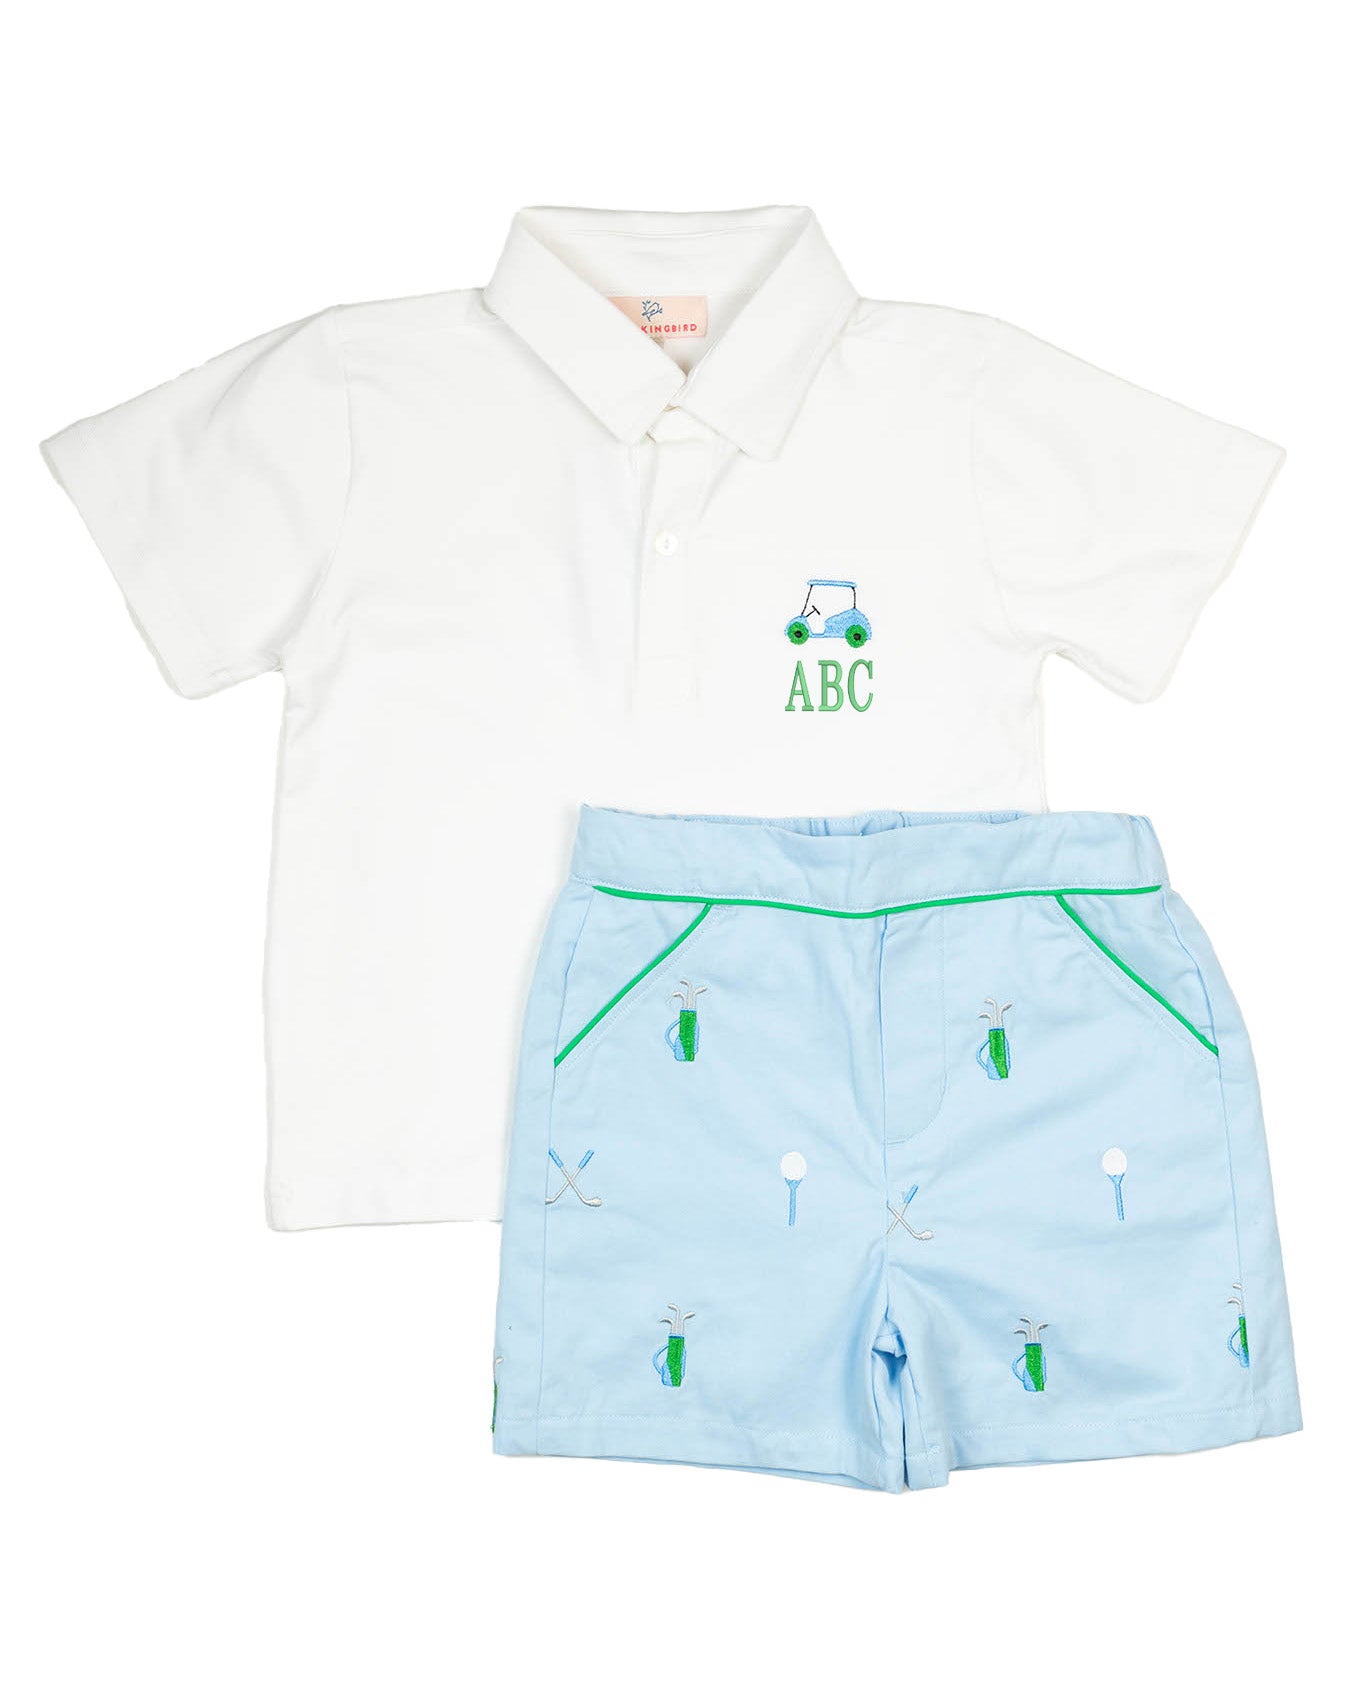 Golf Embroidered Shorts Set